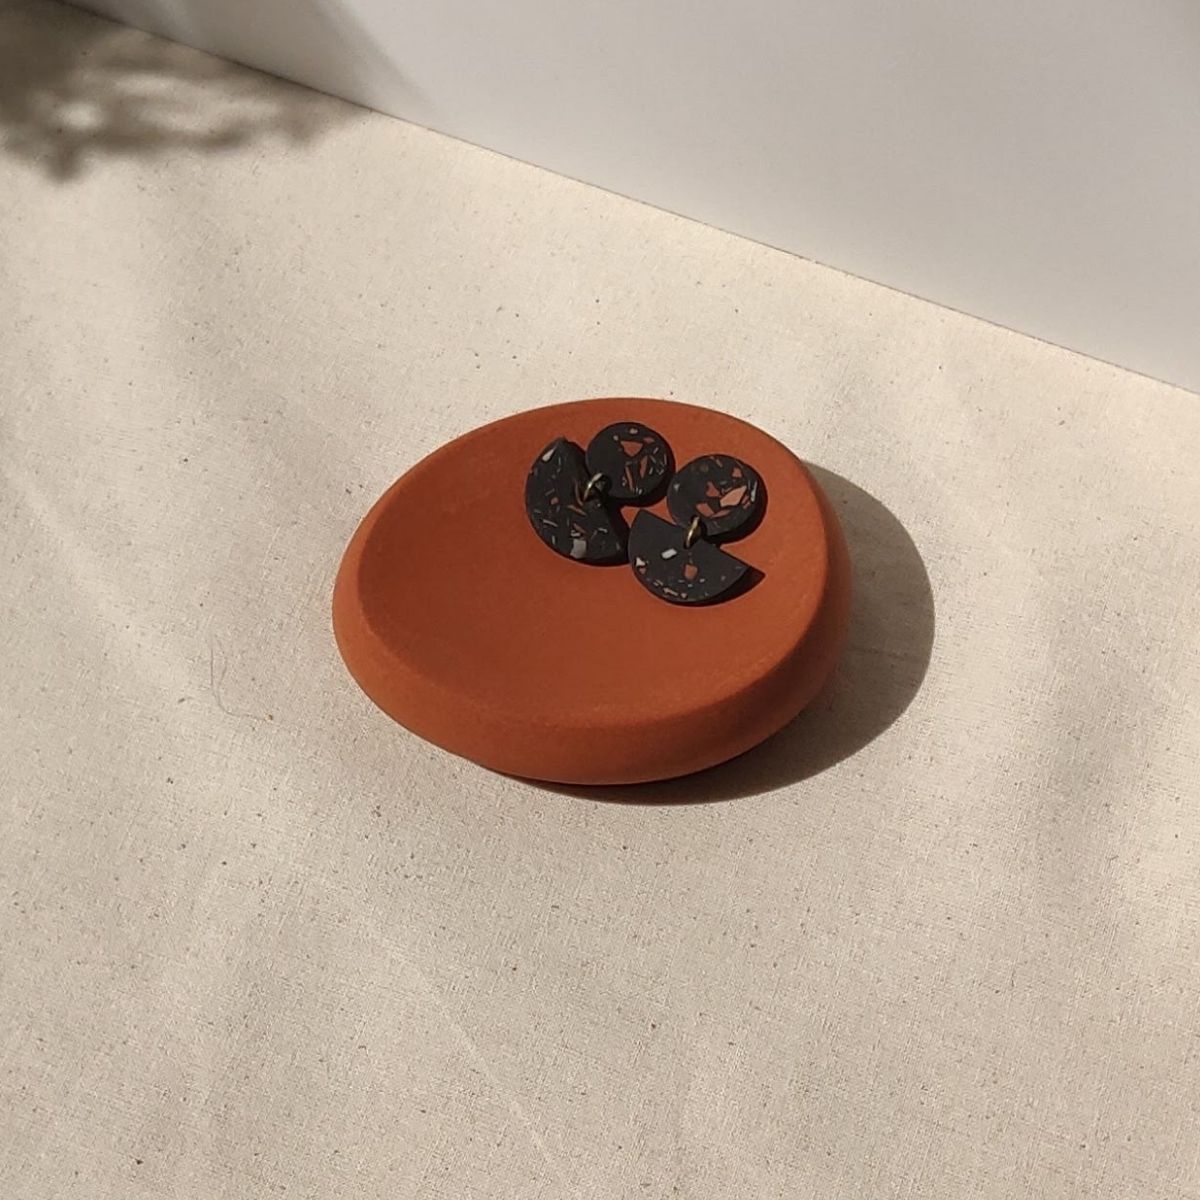 small earring and ring holder trinket dish in terracotta made by Moonkind Studios UK